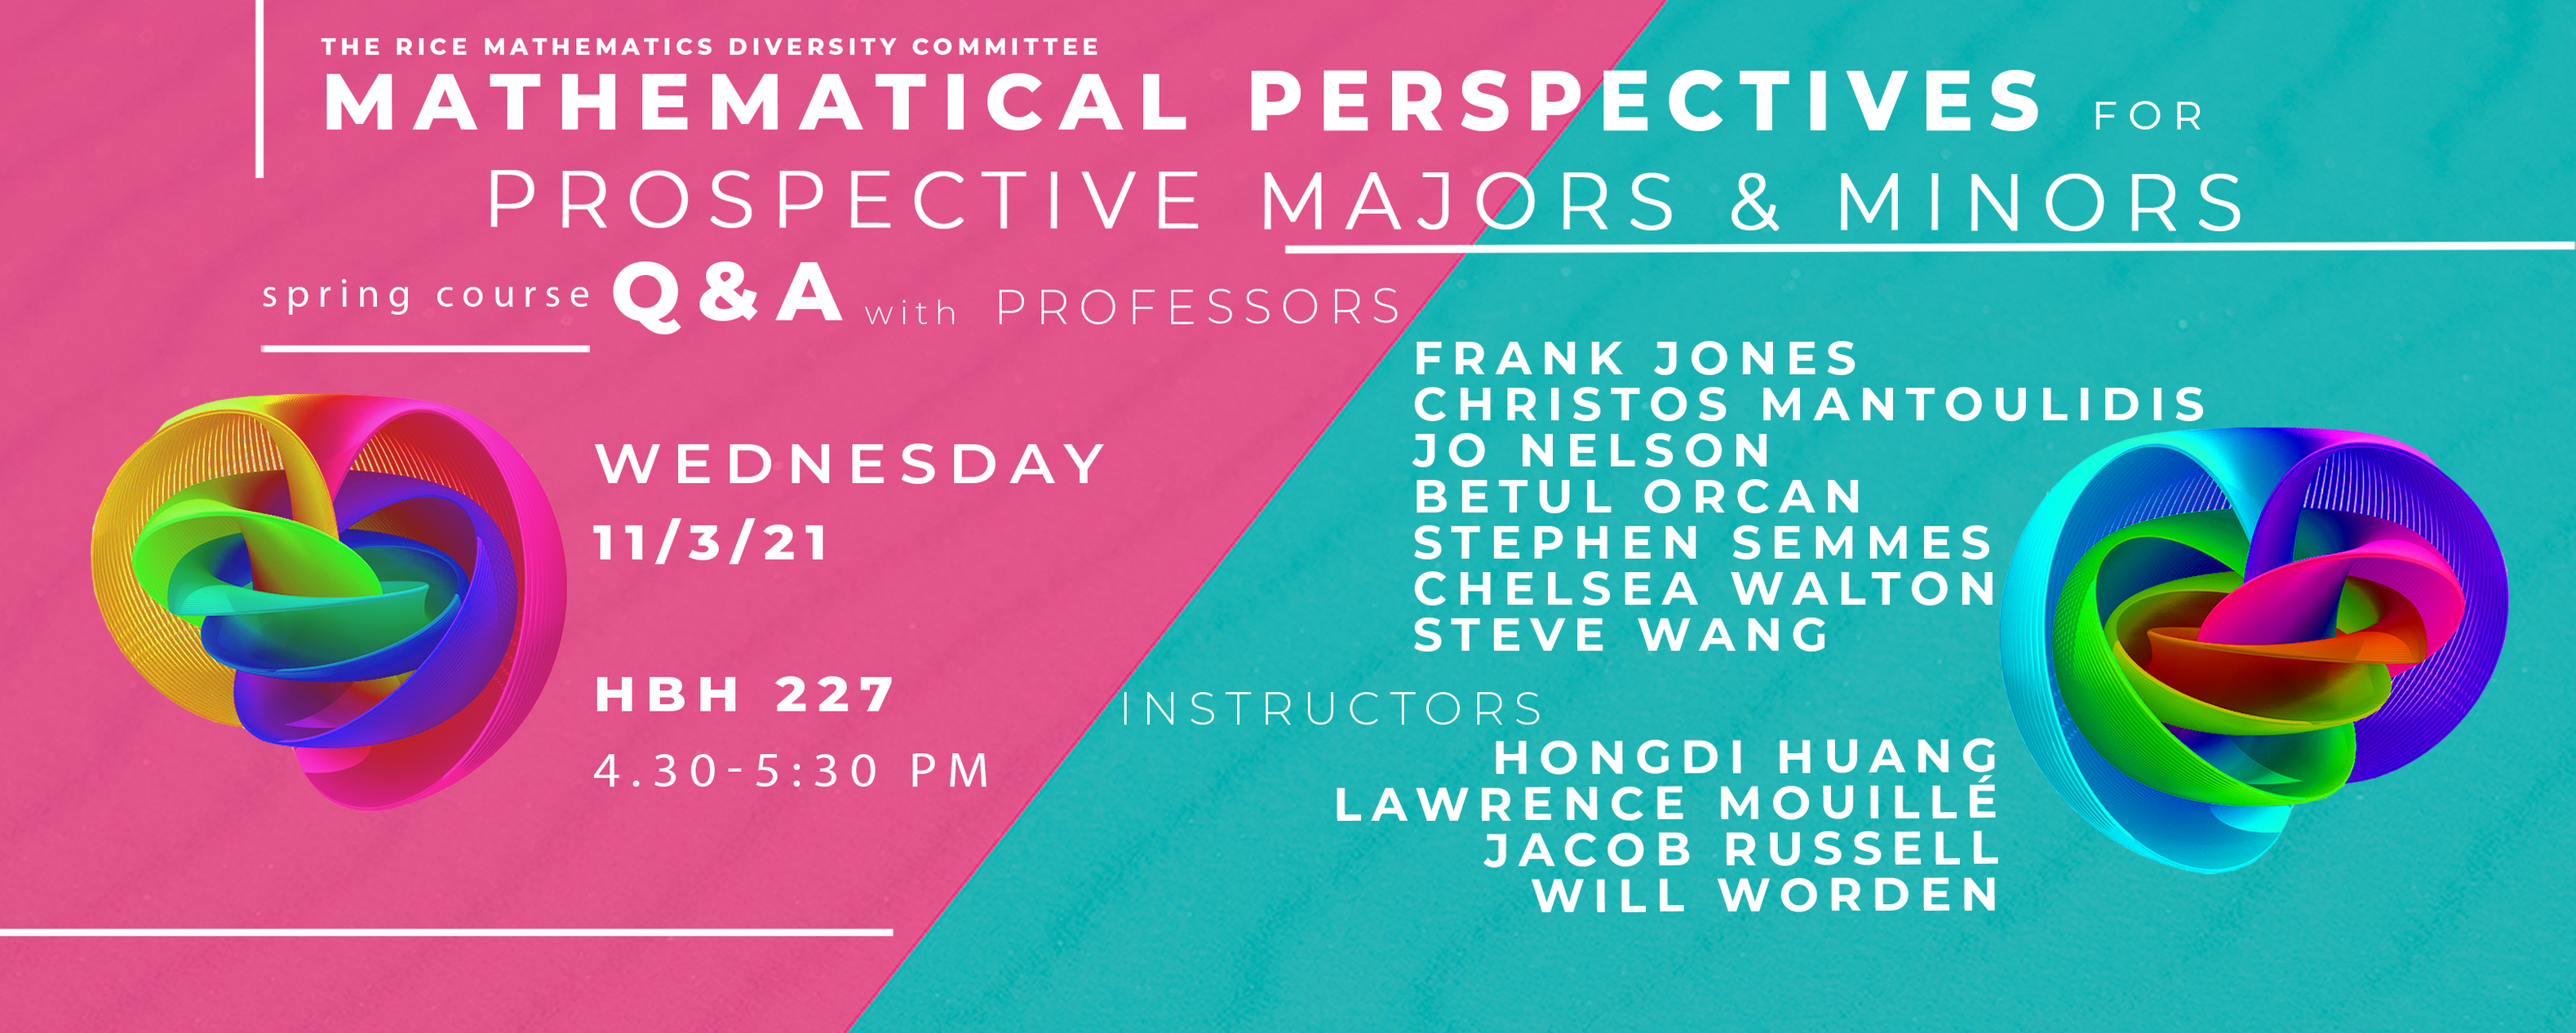 Mathematical Perspectives for Prospective Majors & Minors poster